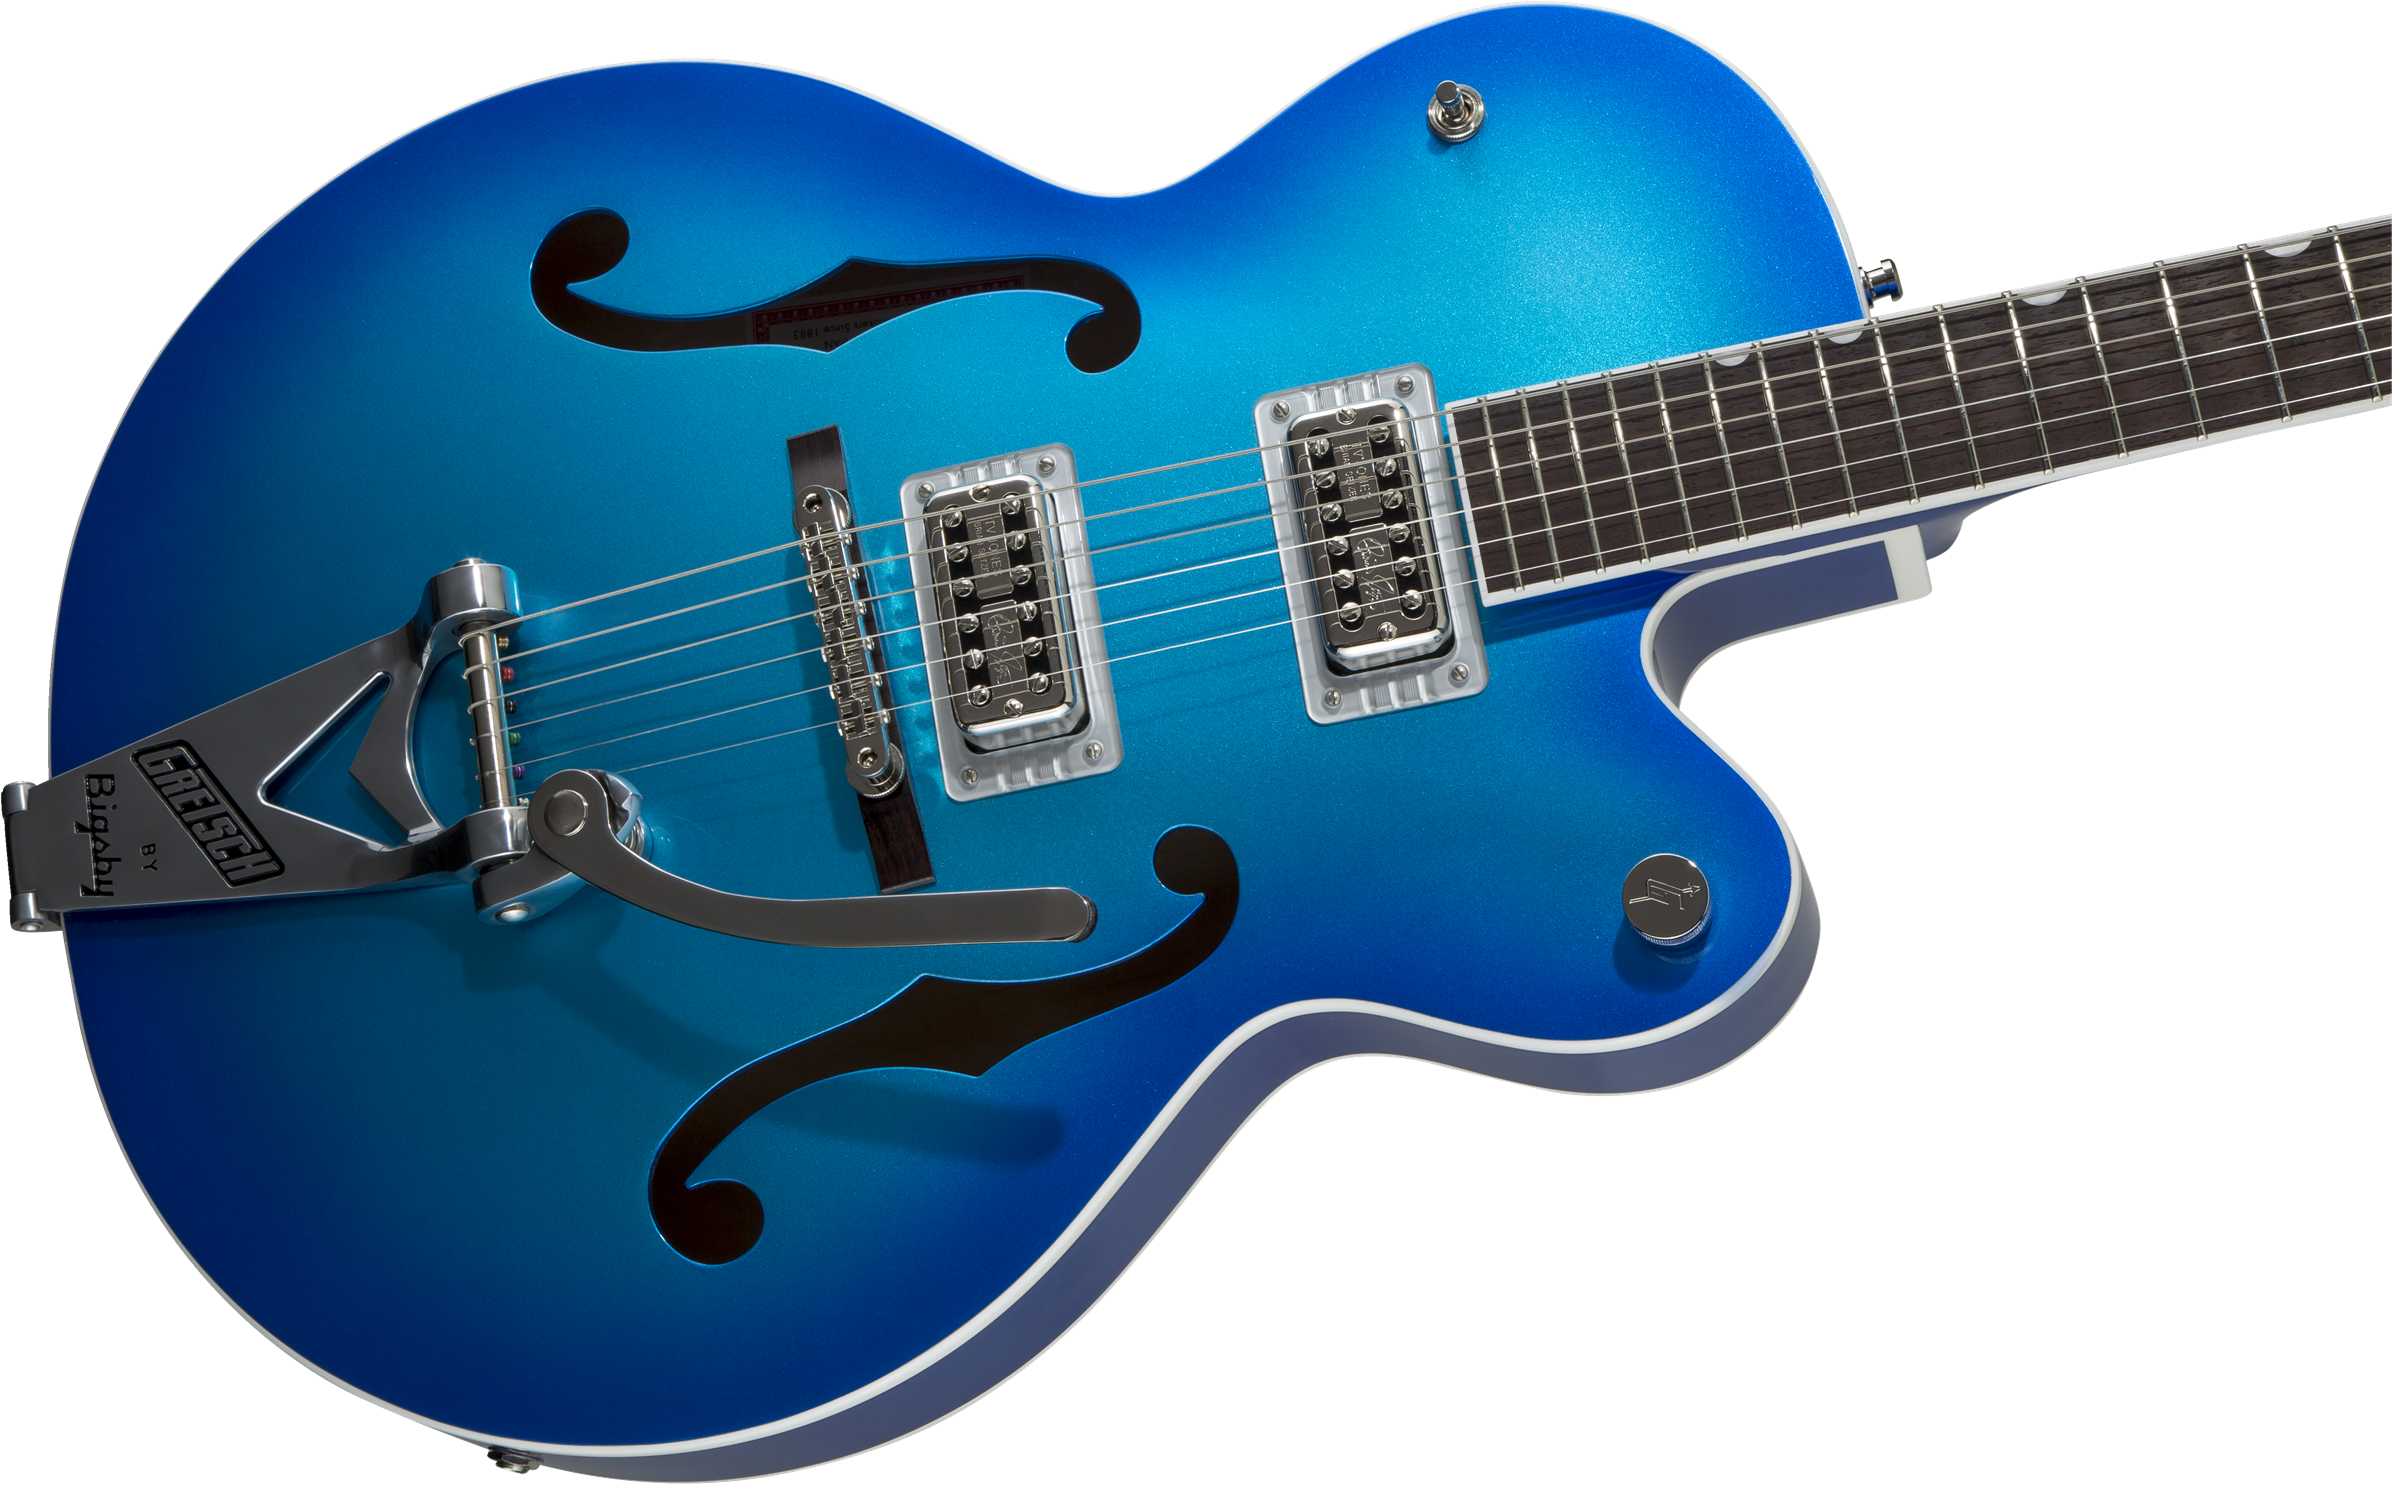 Gretsch G6120T-HR Brian Setzer Signature Hot Rod Hollow Body with Bigsby Rosewood Fingerboard Candy Blue Burst